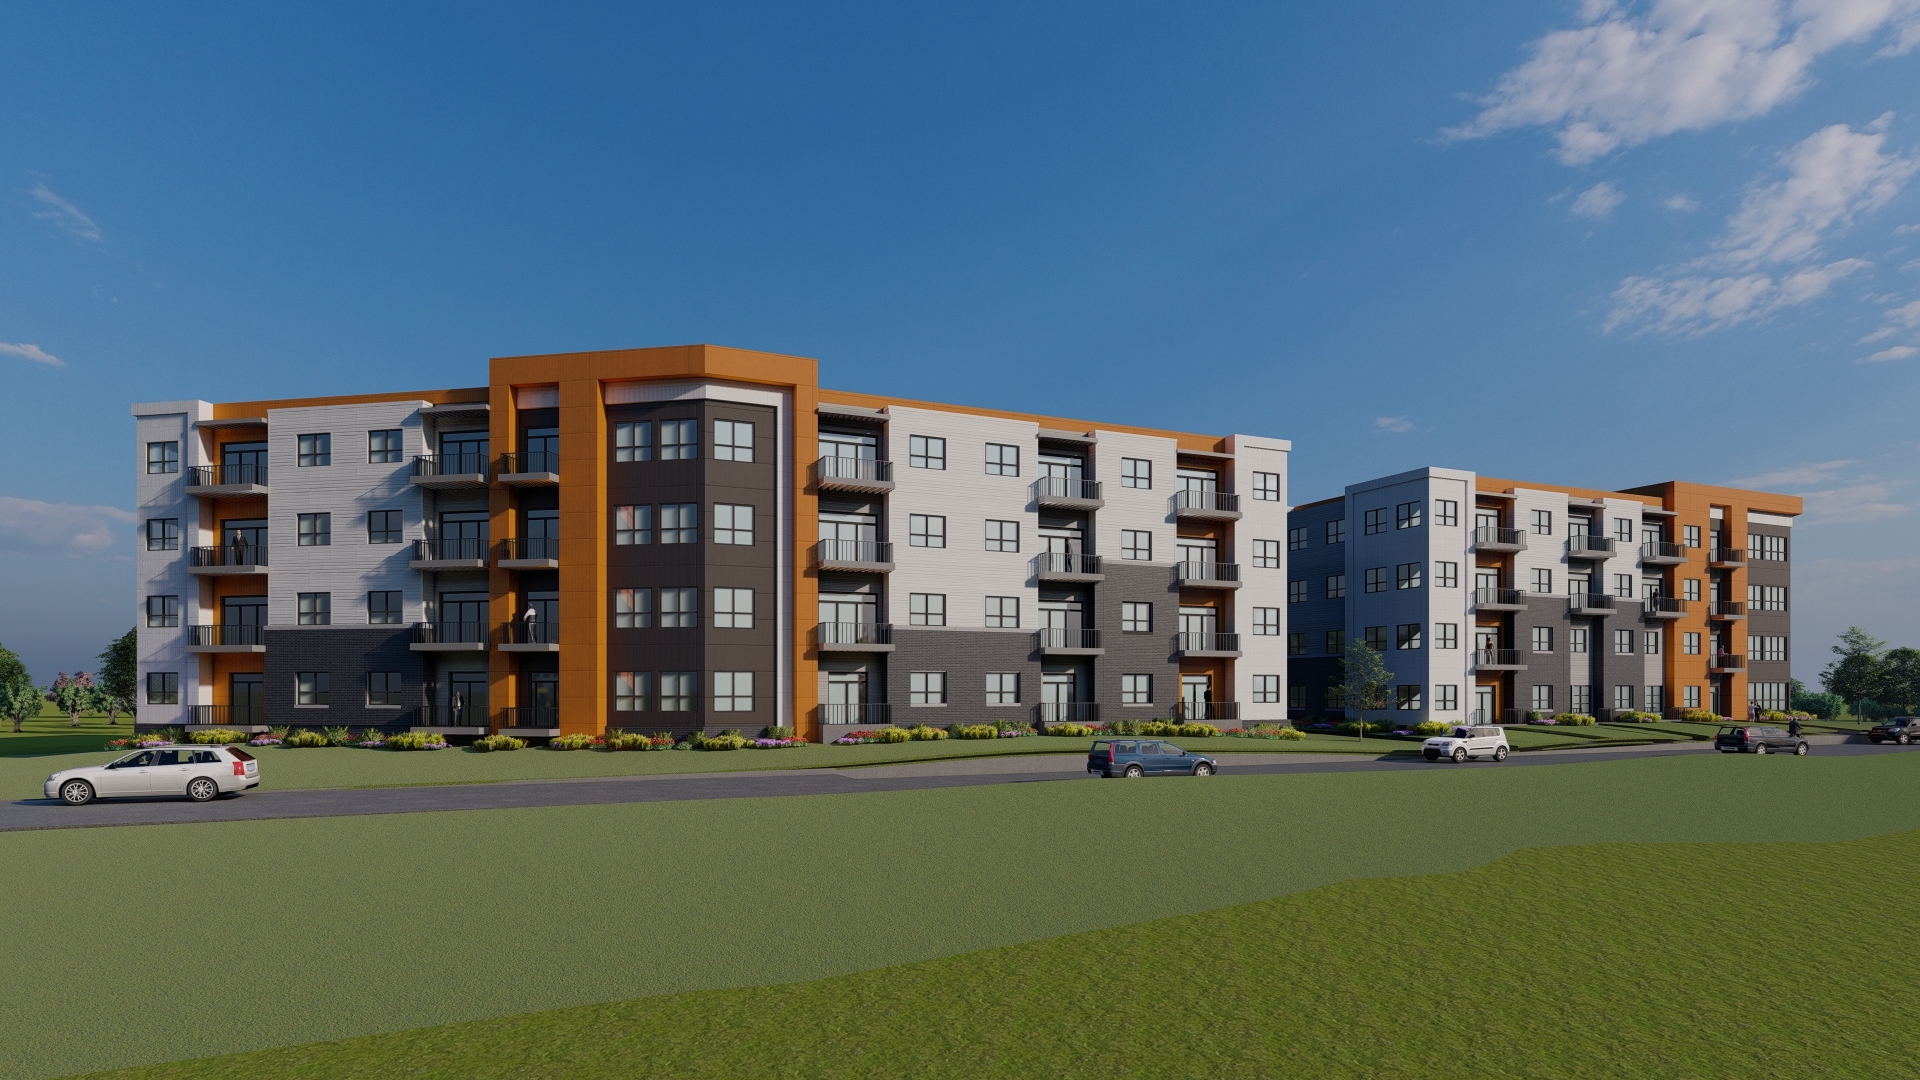 Rendering for the MSP Real Estate Inc. project at 11500 W. Burleigh St. Photo courtesy of MSP.